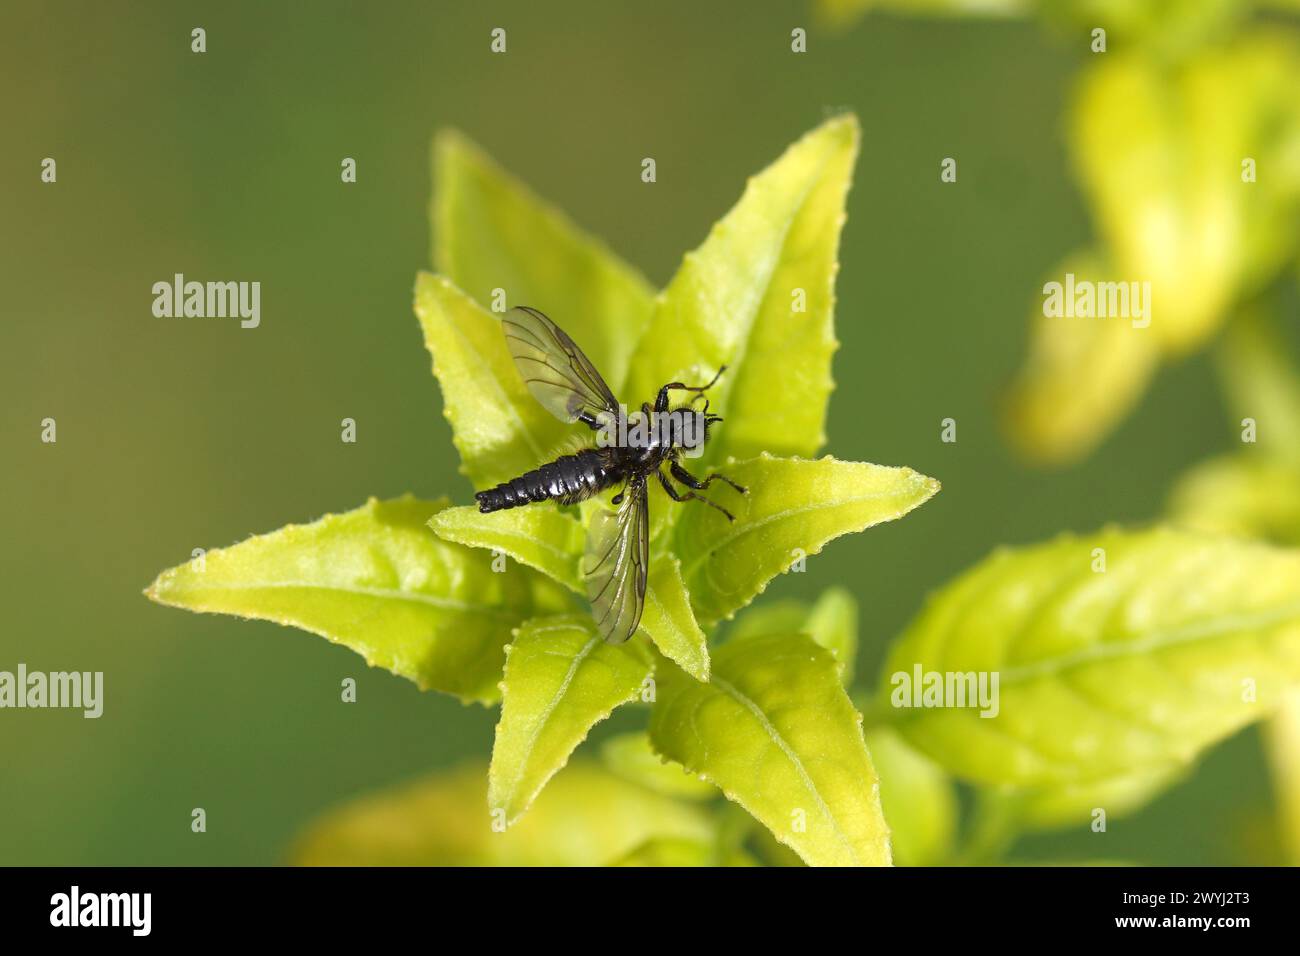 Close up male March fly, Bibio lanigerus on the leaves of a Fuchsia. Family March flies, Bibionidae. Spring, April, Netherlands. Stock Photo